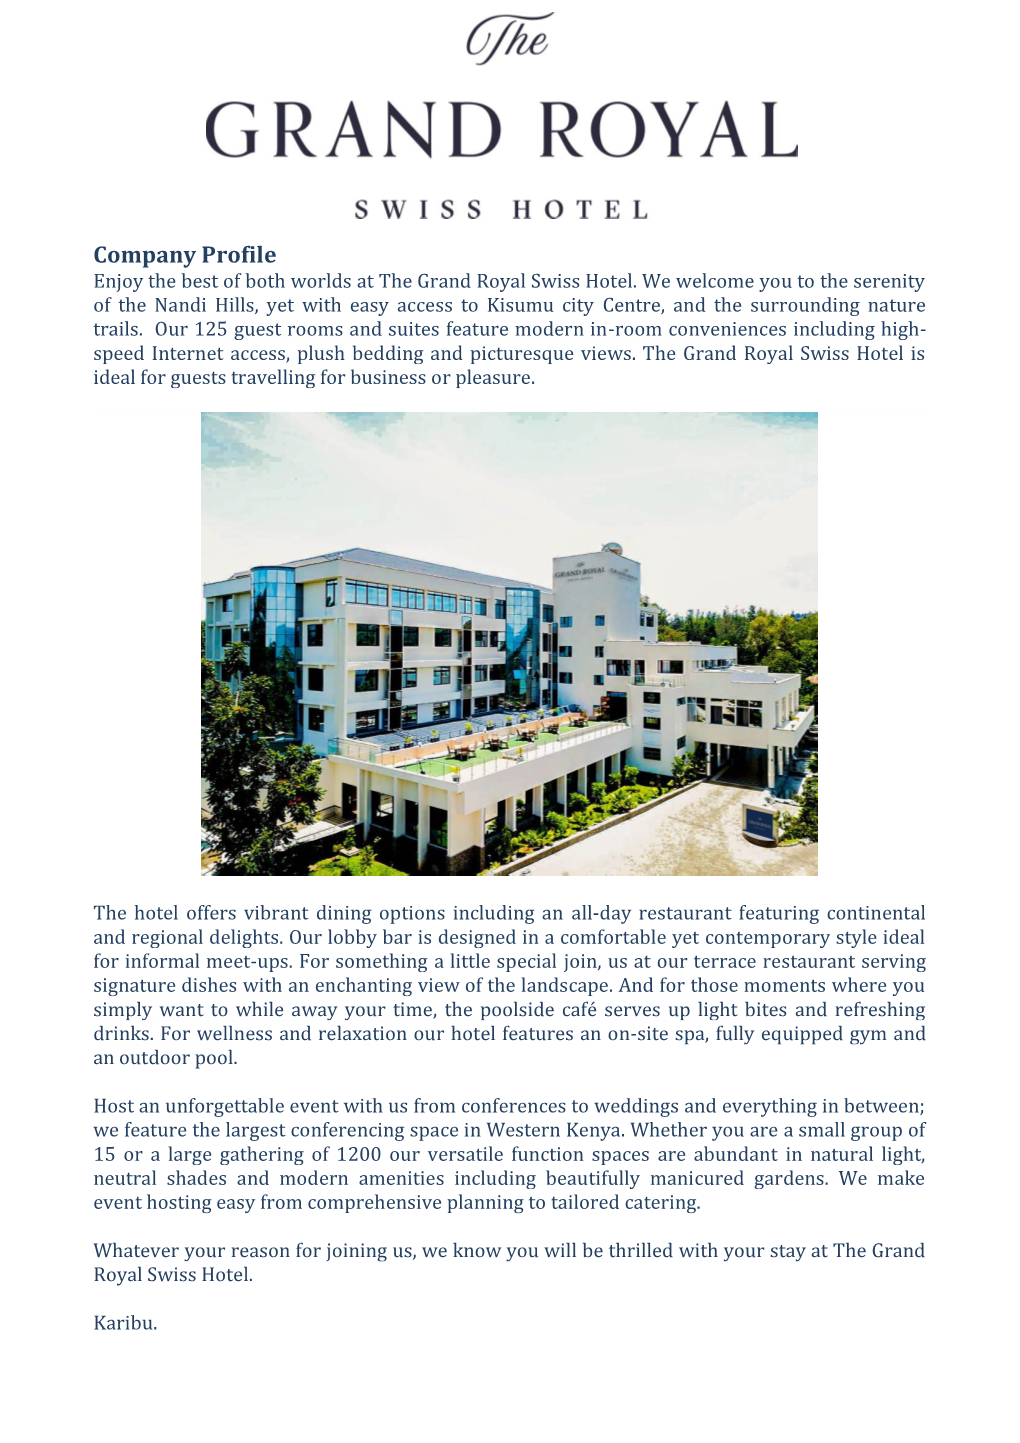 Company Profile Enjoy the Best of Both Worlds at the Grand Royal Swiss Hotel